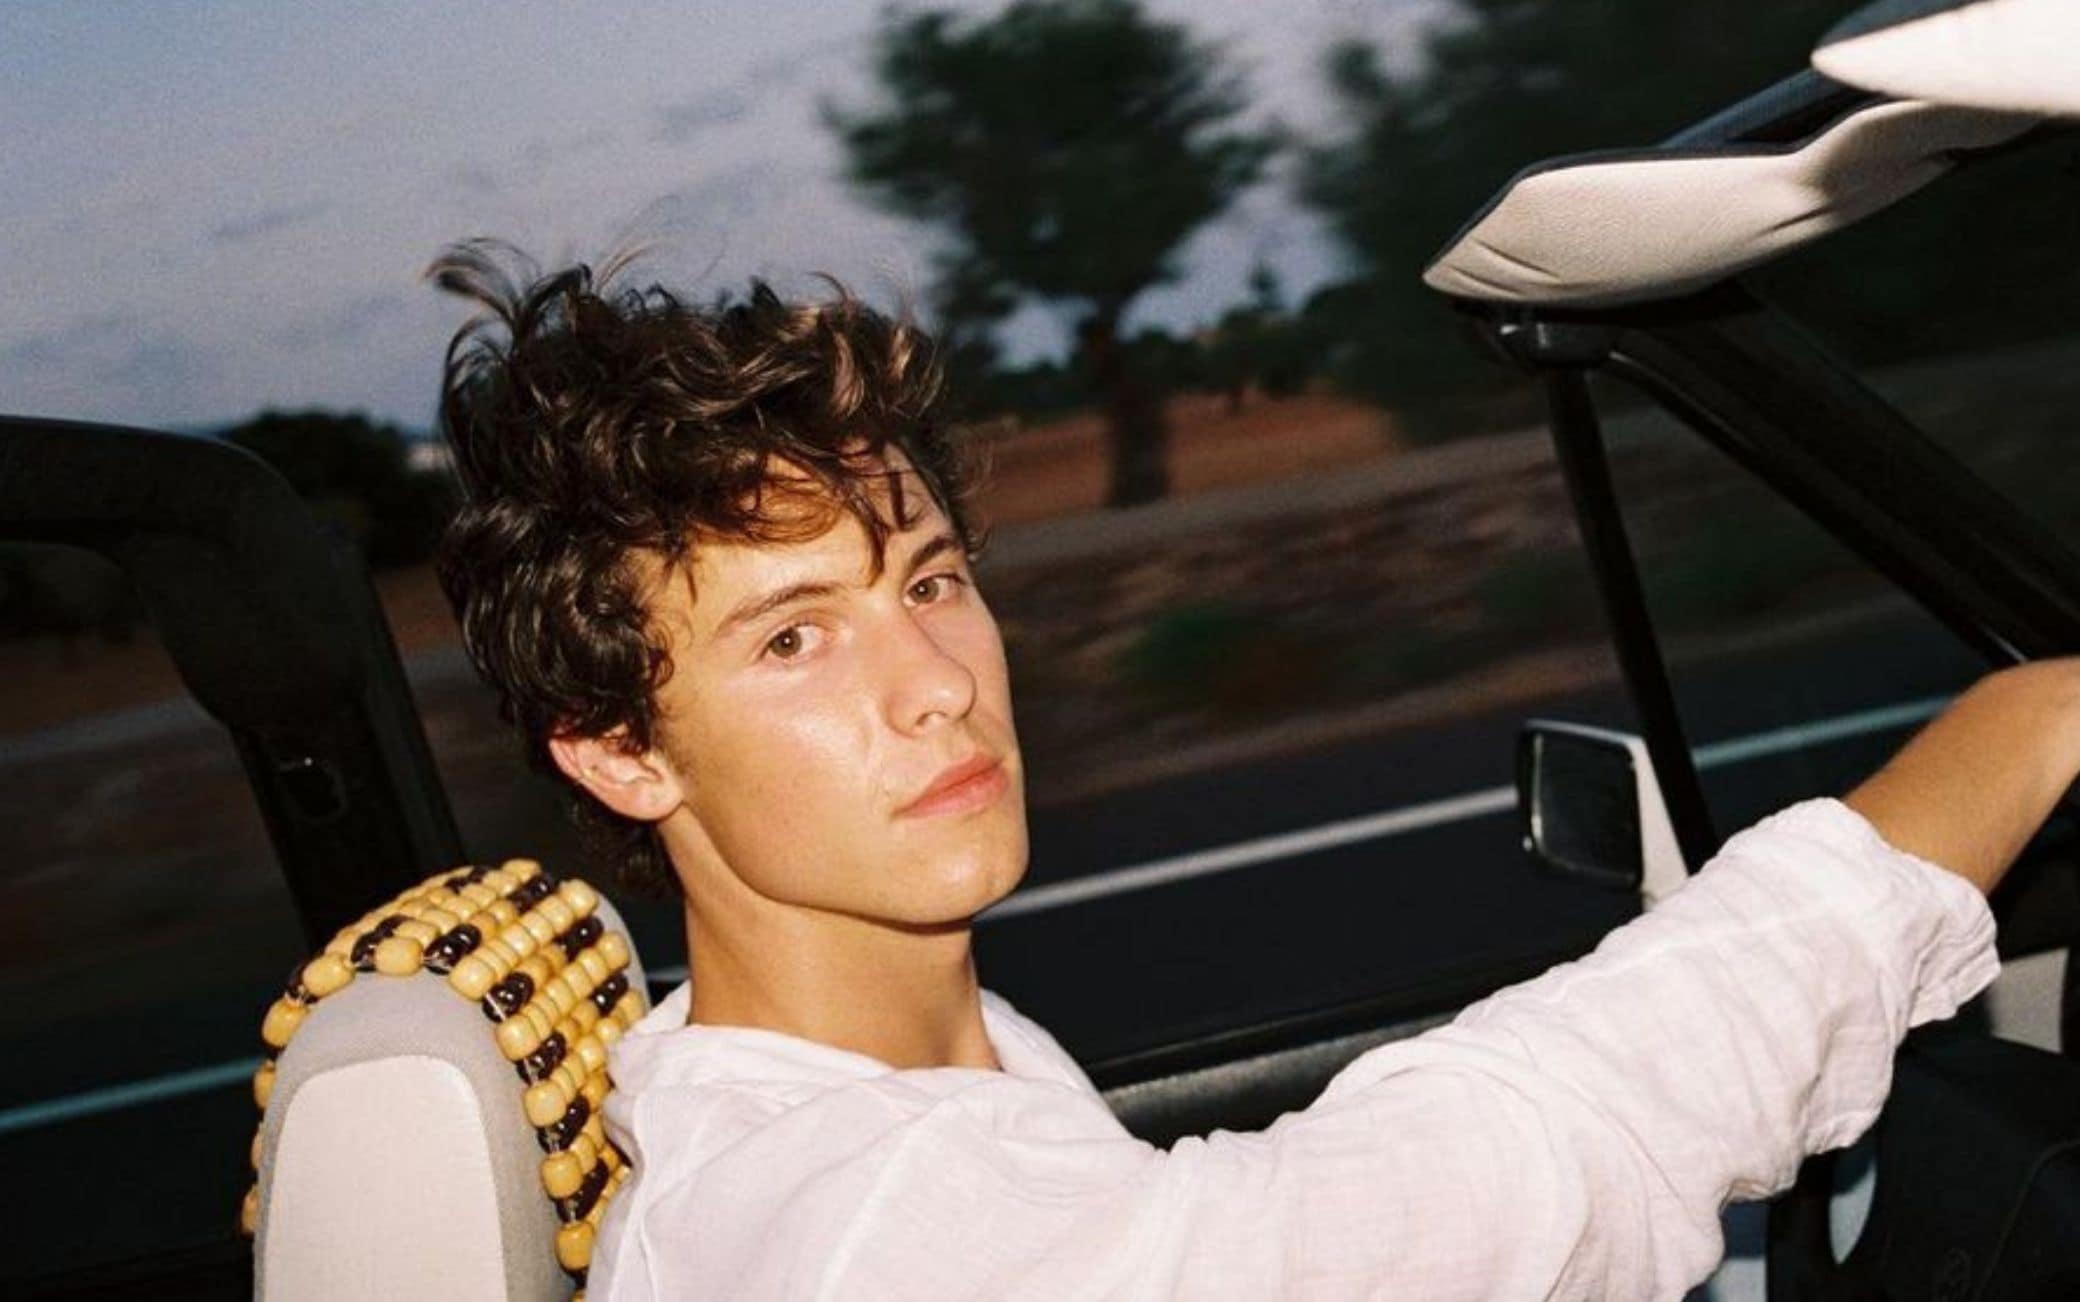 Shawn Mendes in concert in Milan in 2022: info and tickets